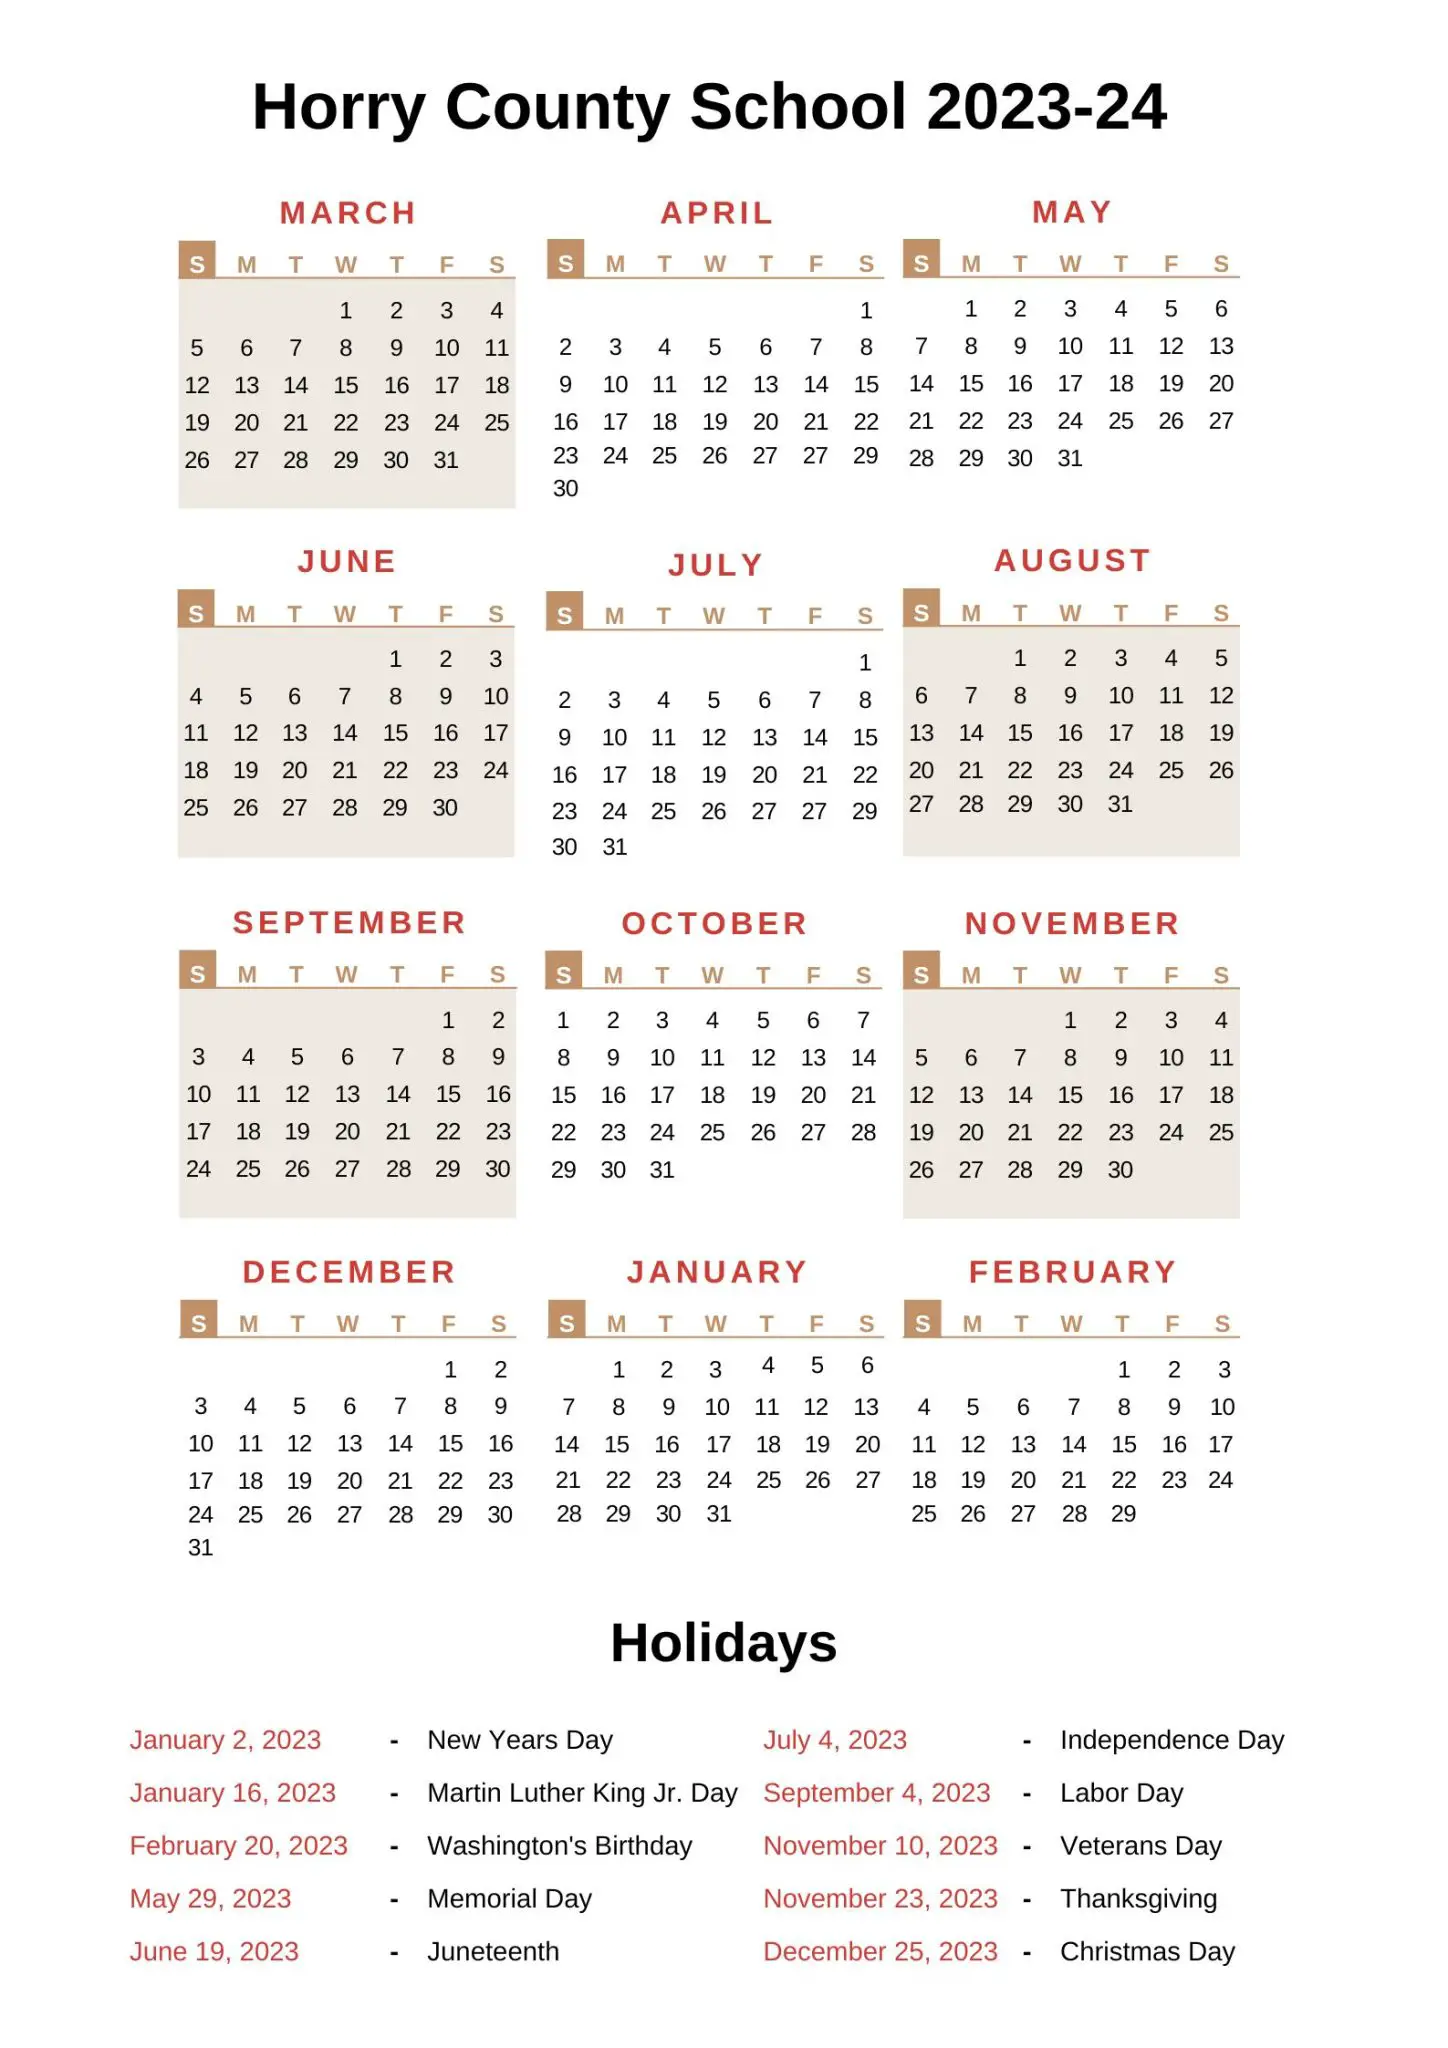 Horry County Schools Calendar 202324 with Holidays